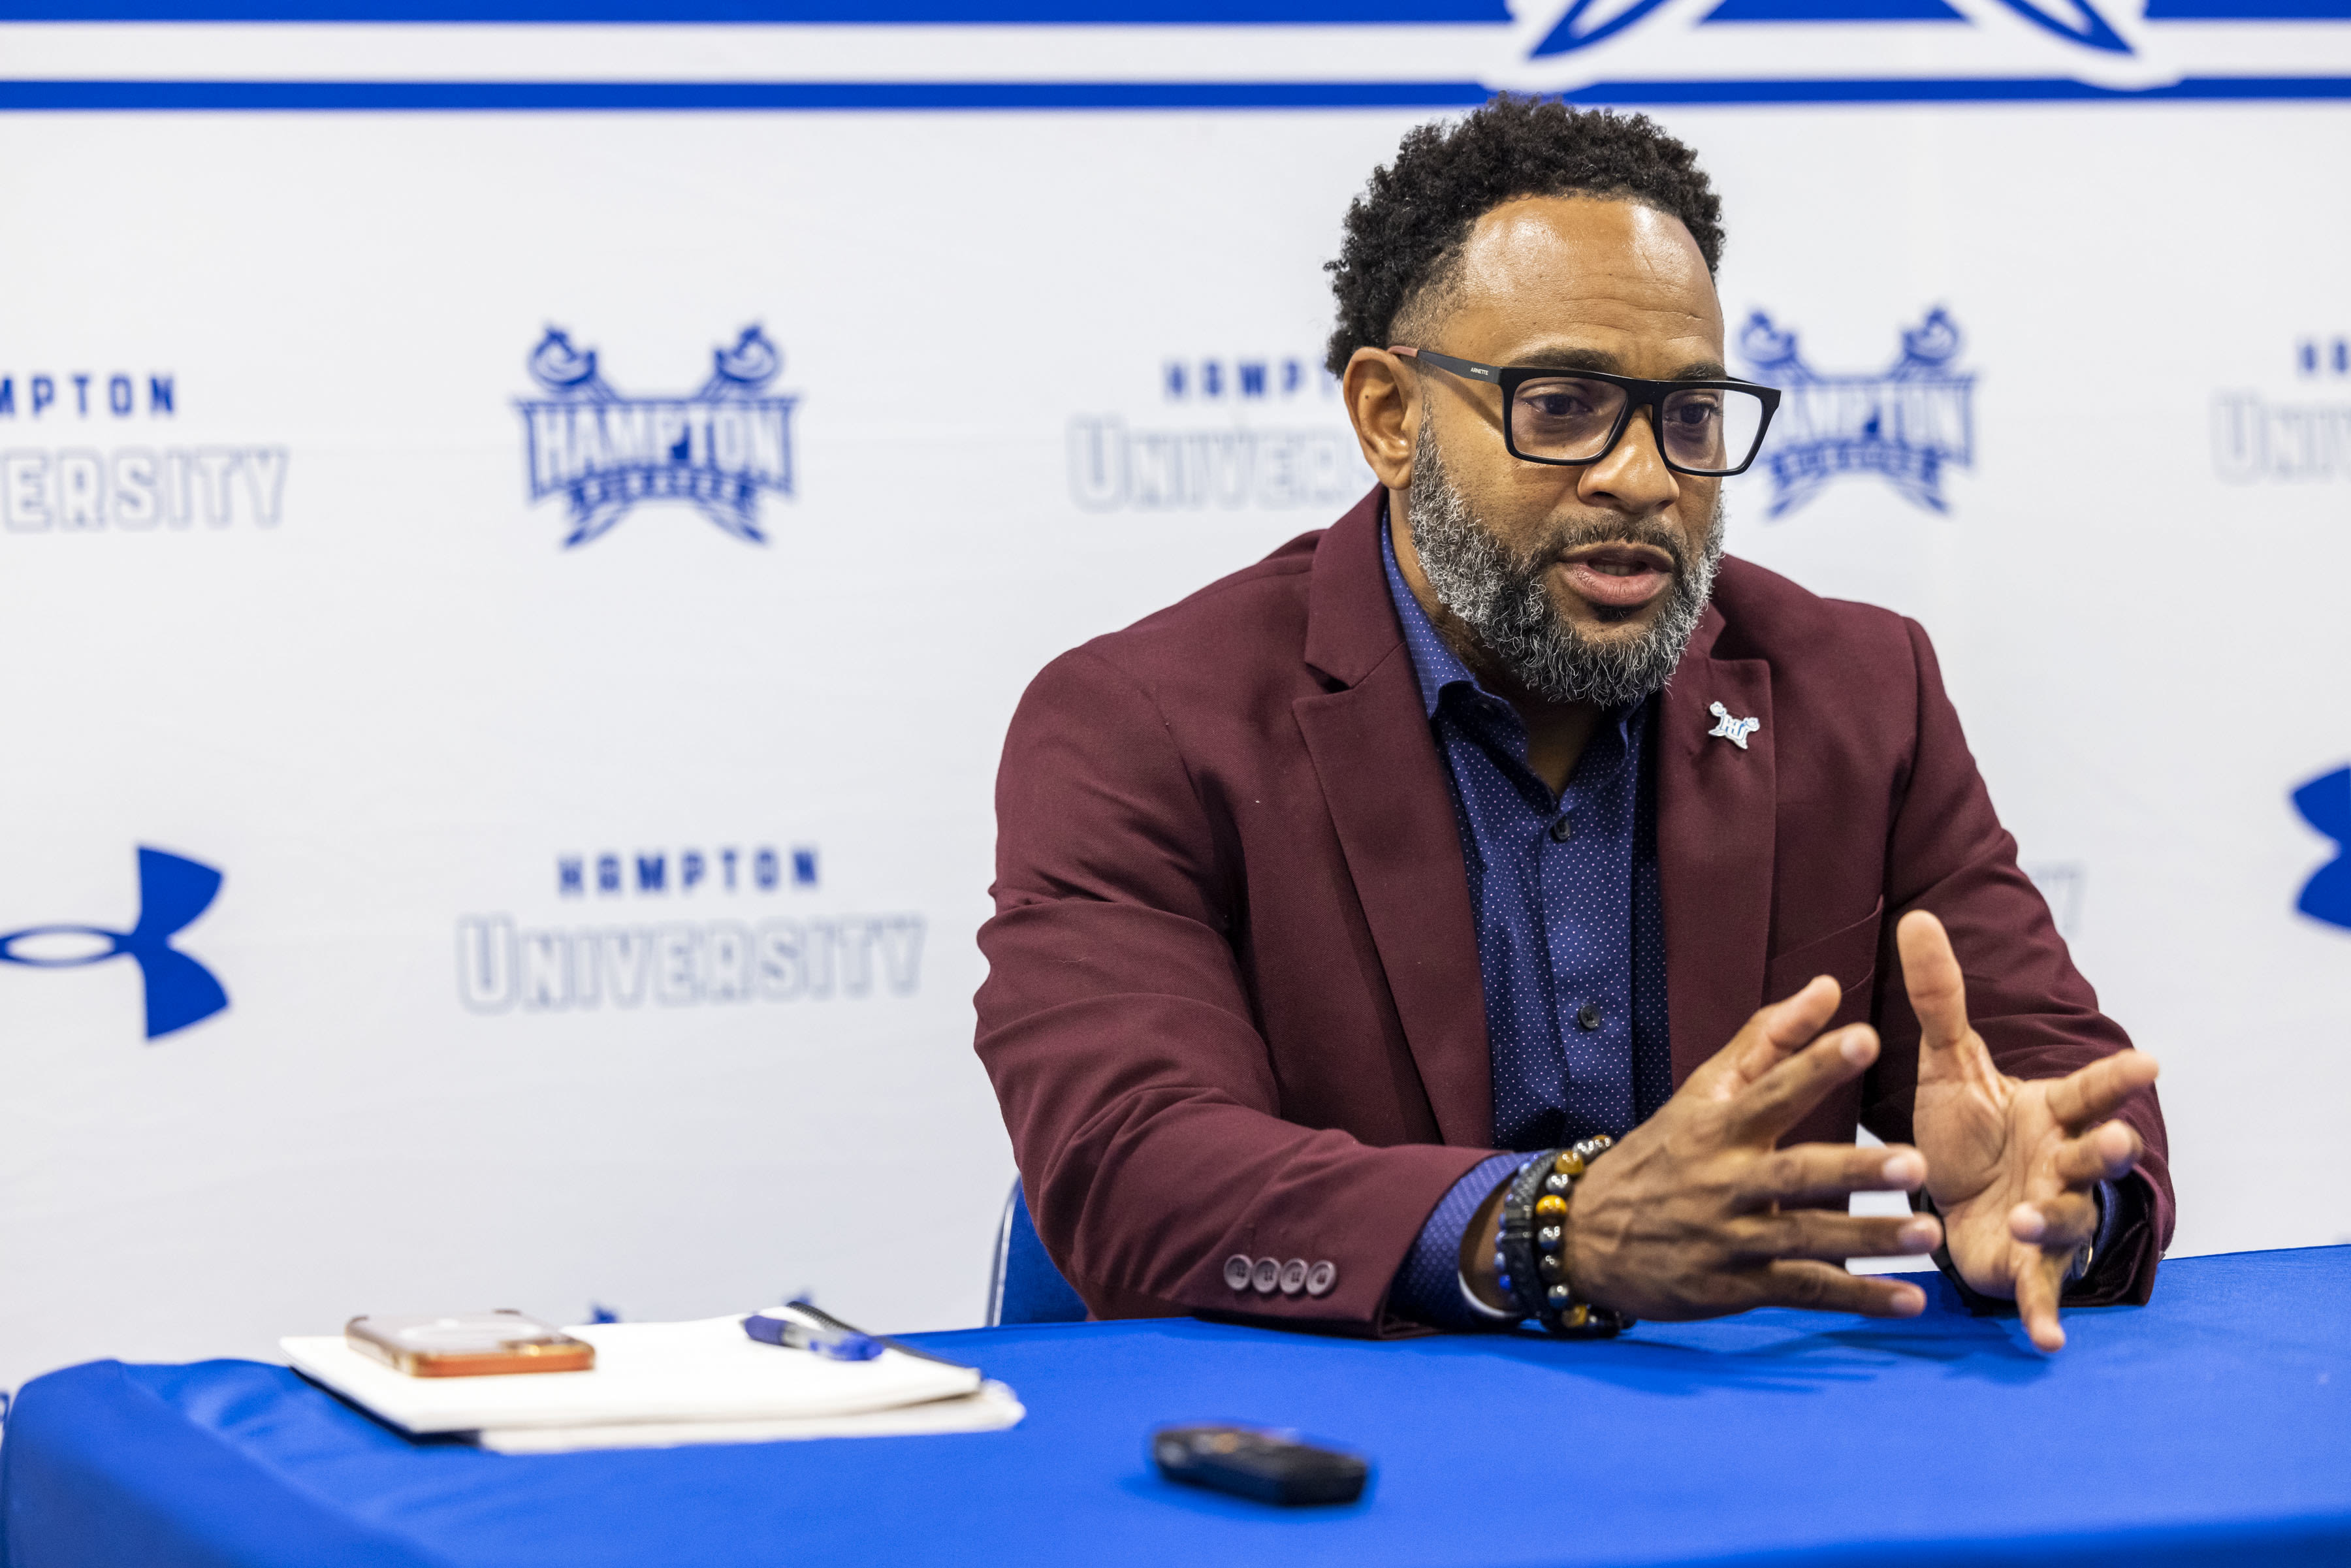 Trent Boykin ready to take over Hampton University football: ‘I’ve been preparing for this a long time.’